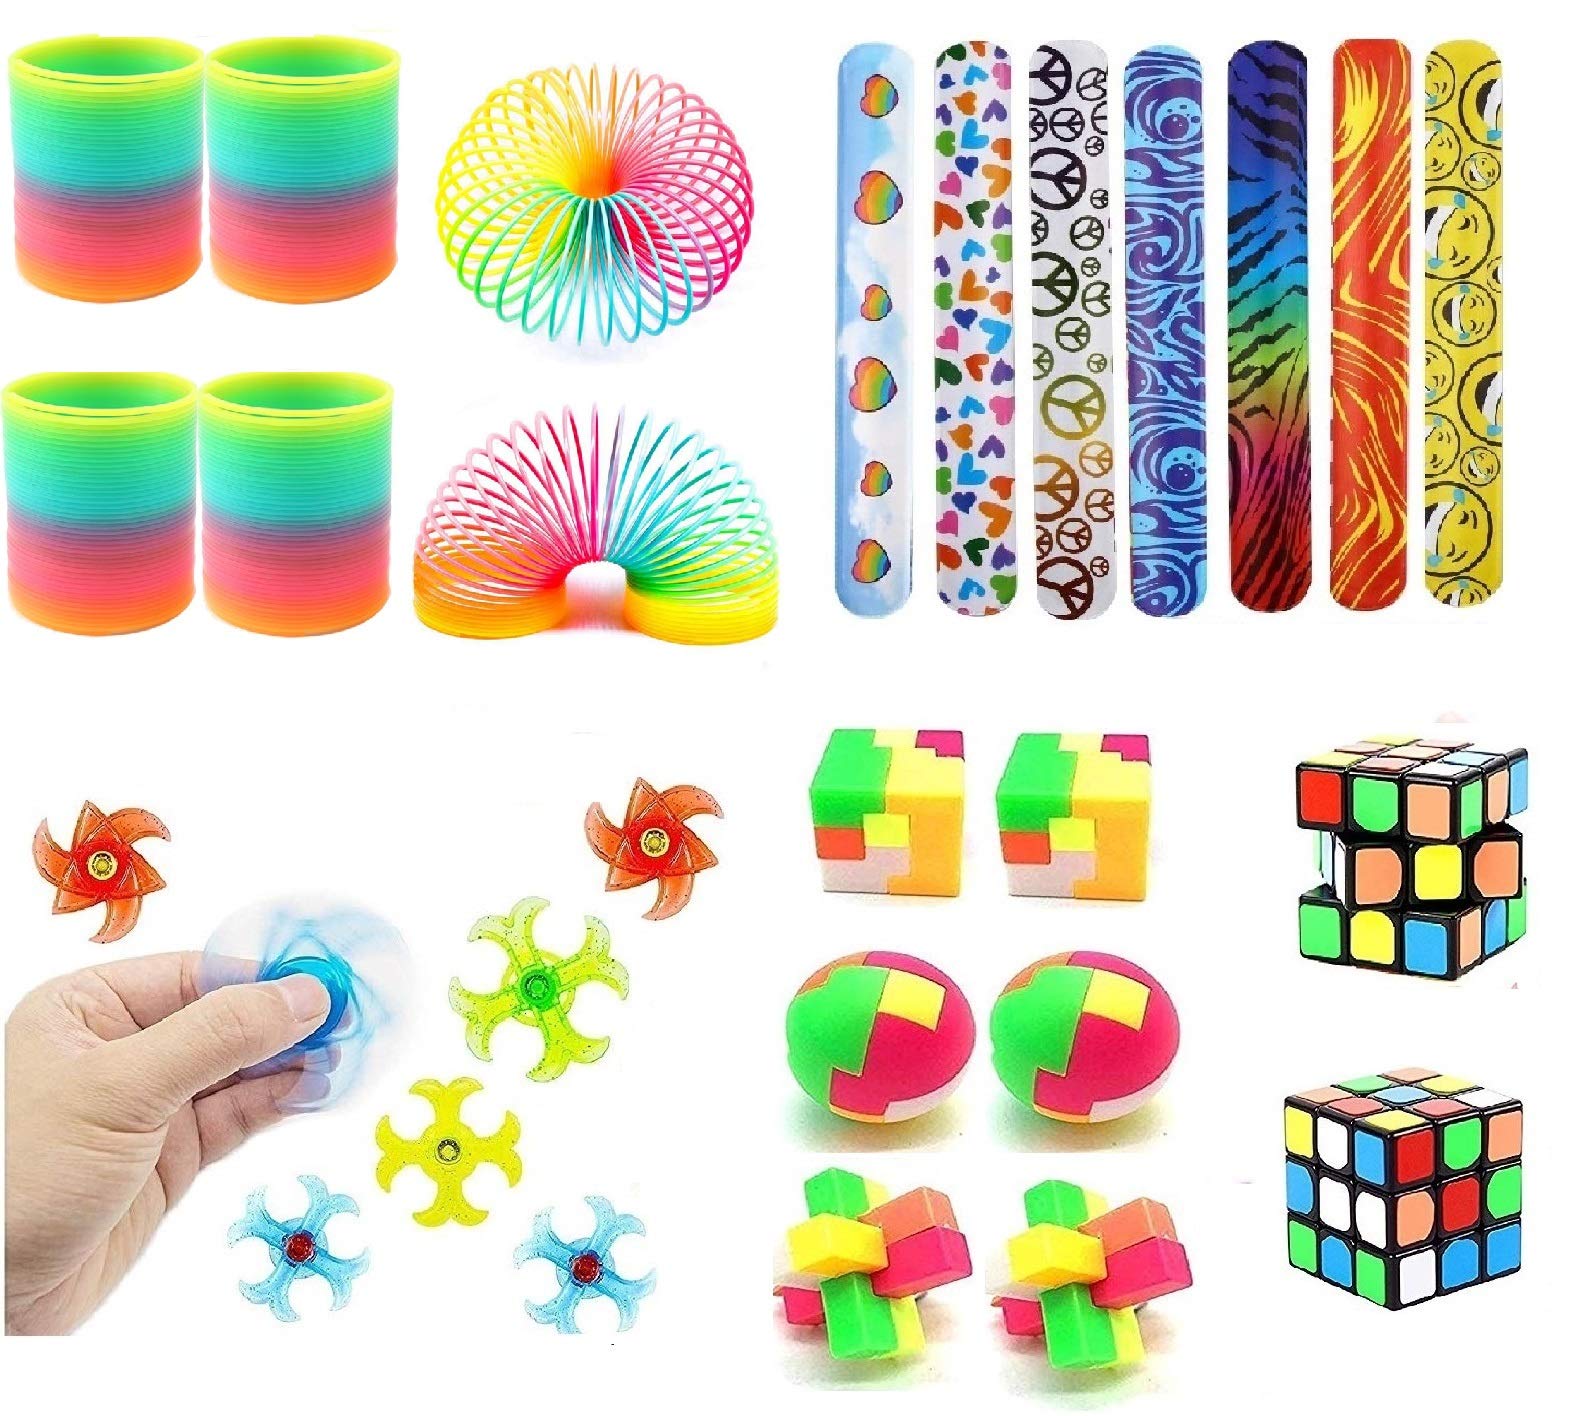 Party Favors For Kids Toy Assortment Bundle,Mochi Squishies,Puzzles,Finger Gyro Spiral Twister Toys For Birthday Party,Classroom Rewards,Carnival Prizes,Pinata Filler,Treasure Box,Goodie Bag Filler